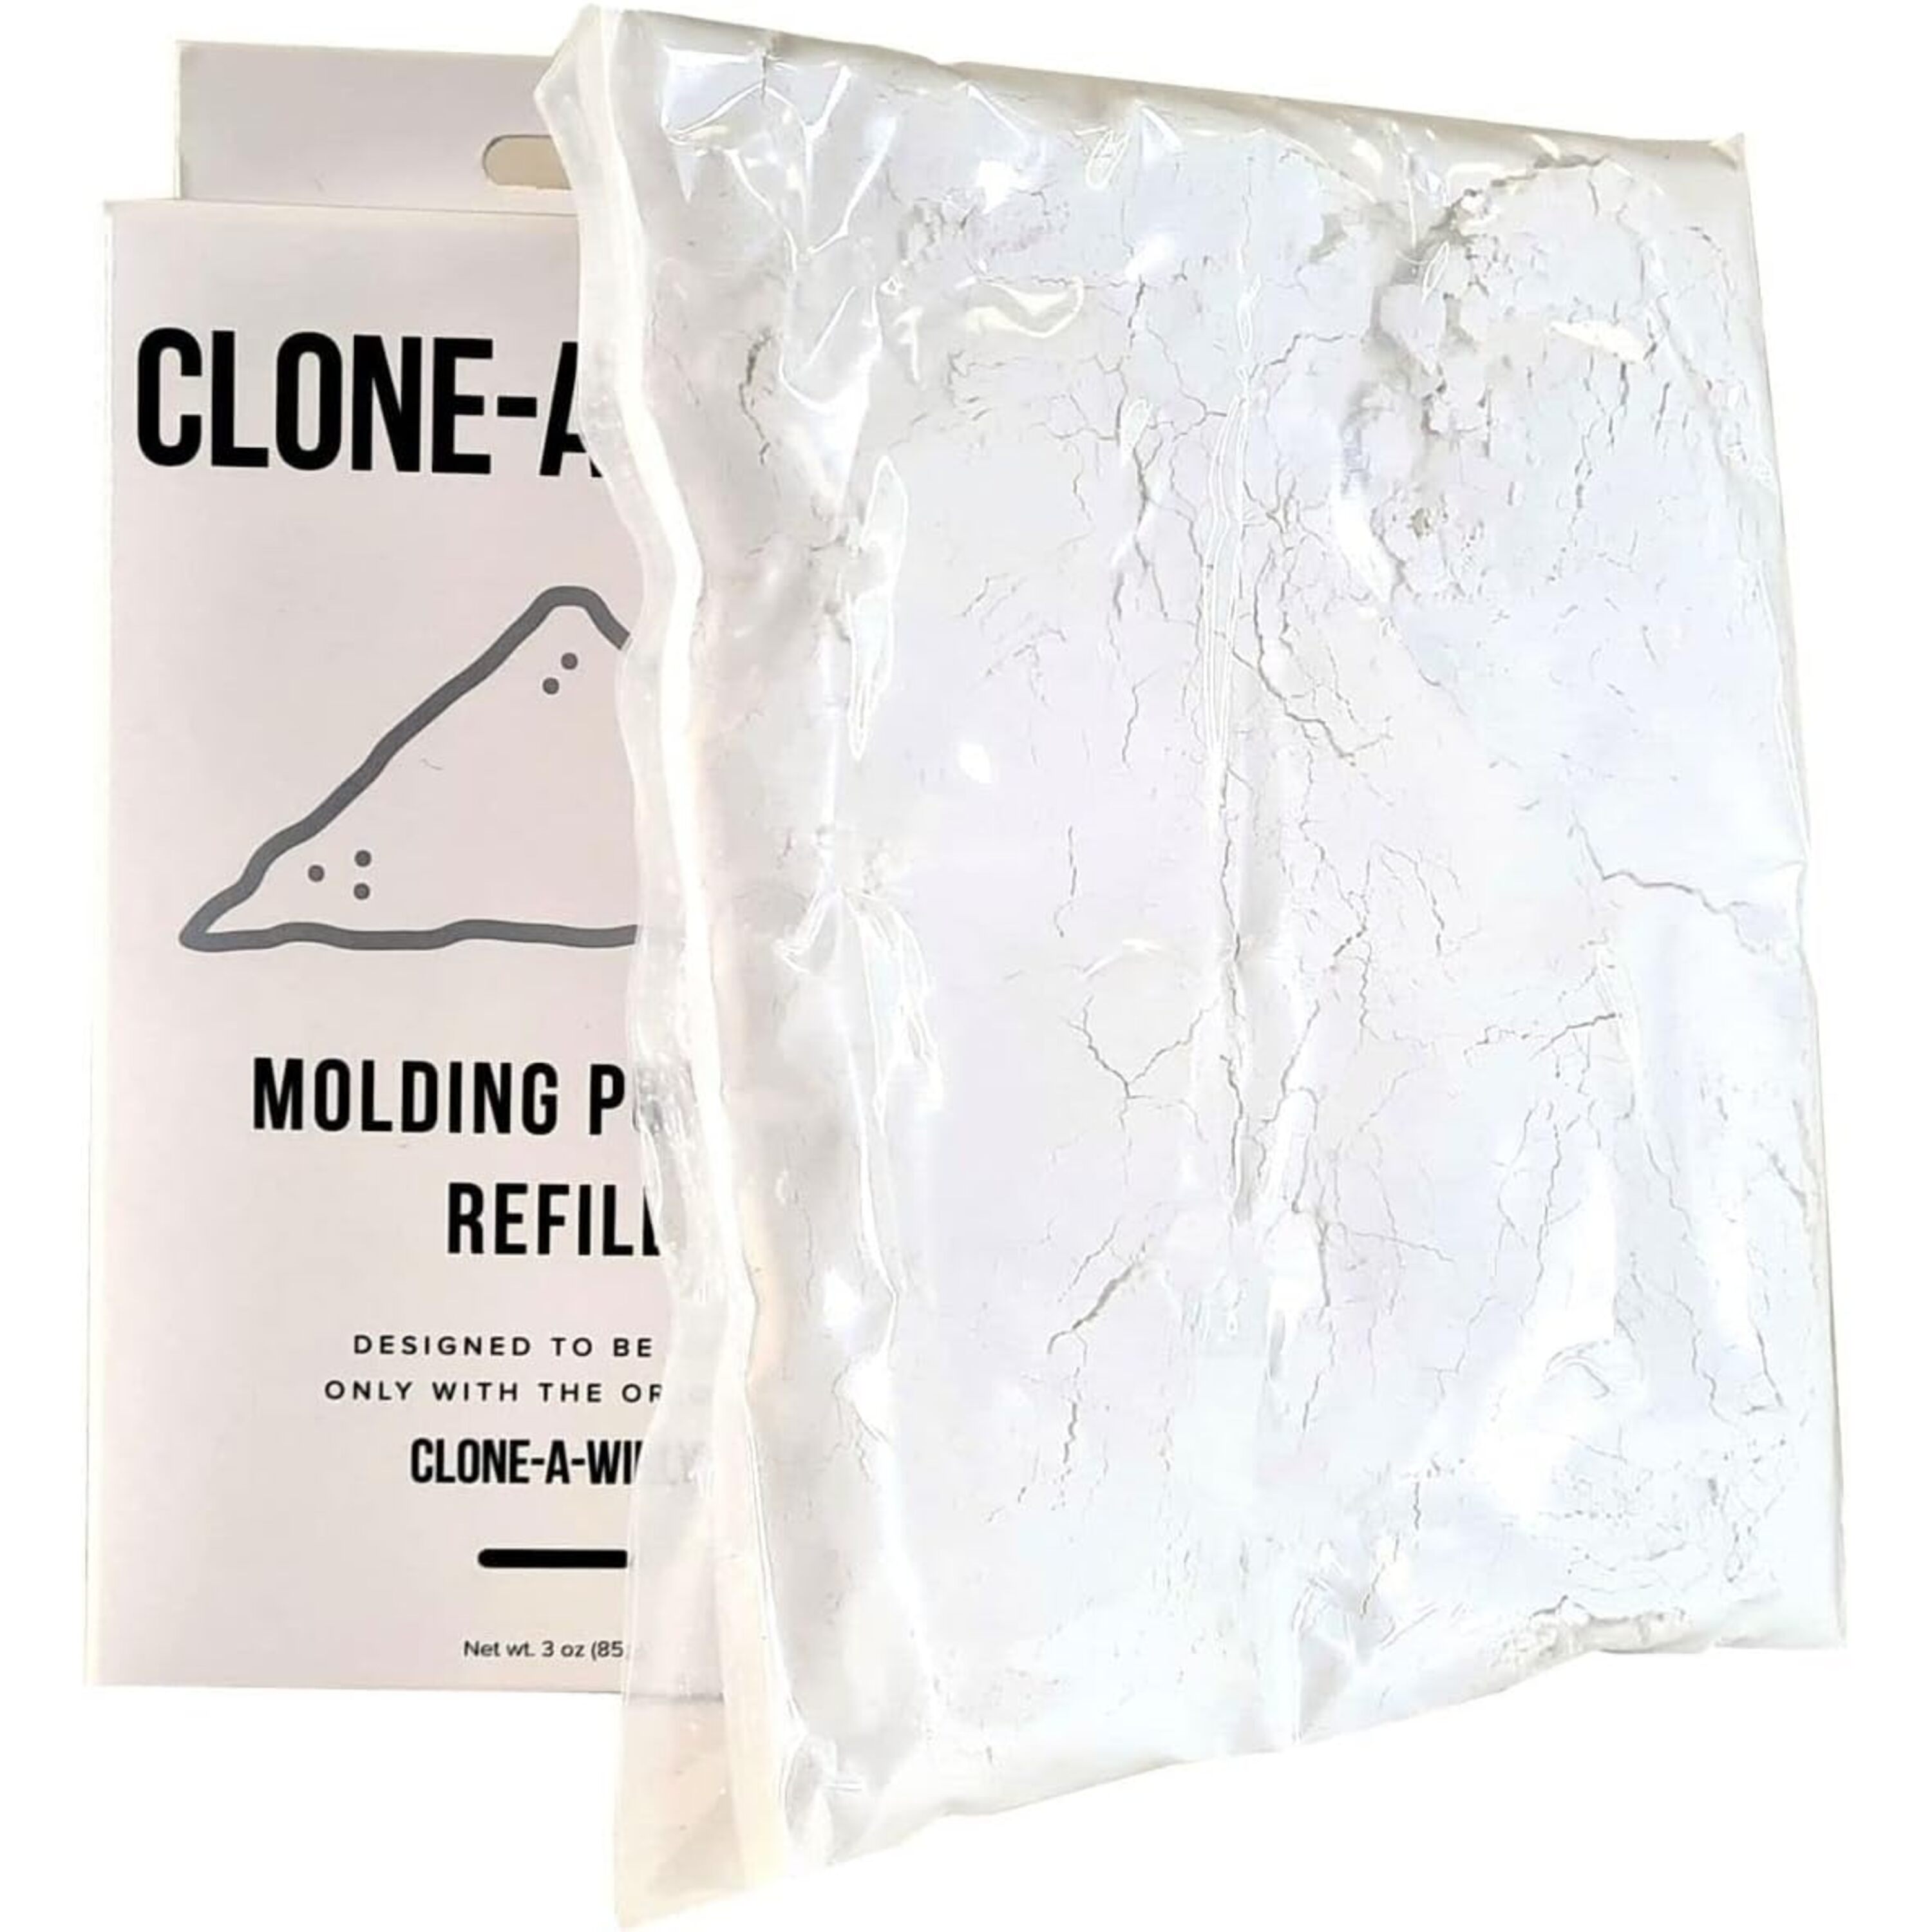 Clone A Willy Mold Powder Refill 3.3 oz. – FB Boutique